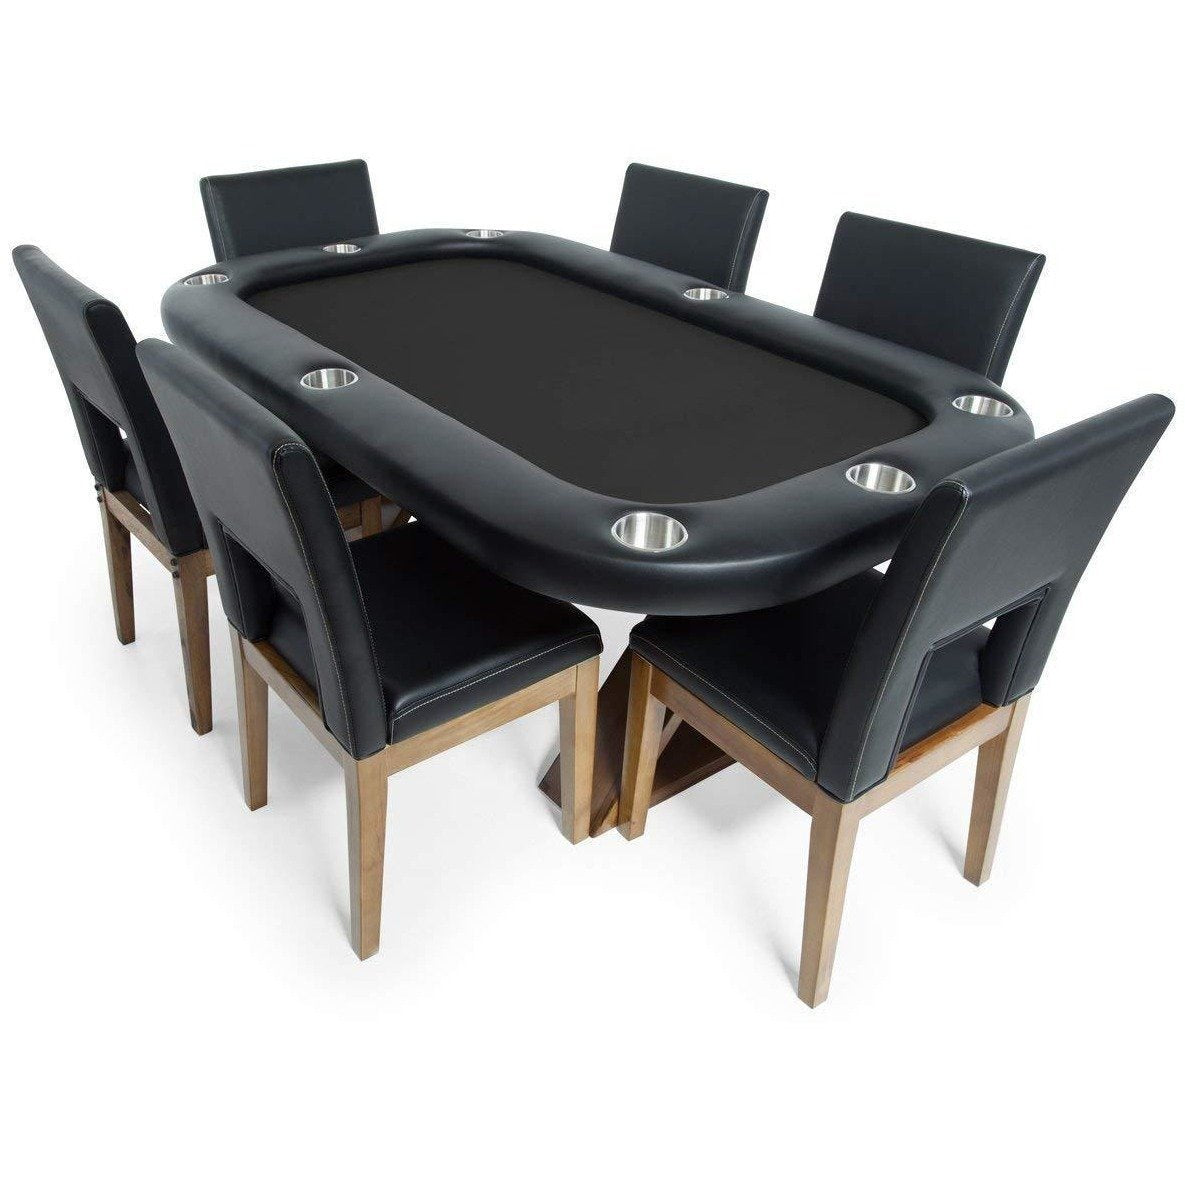 BBO Poker Tables Helmsley Poker Dining Table and Chair Set - Just Poker Tables